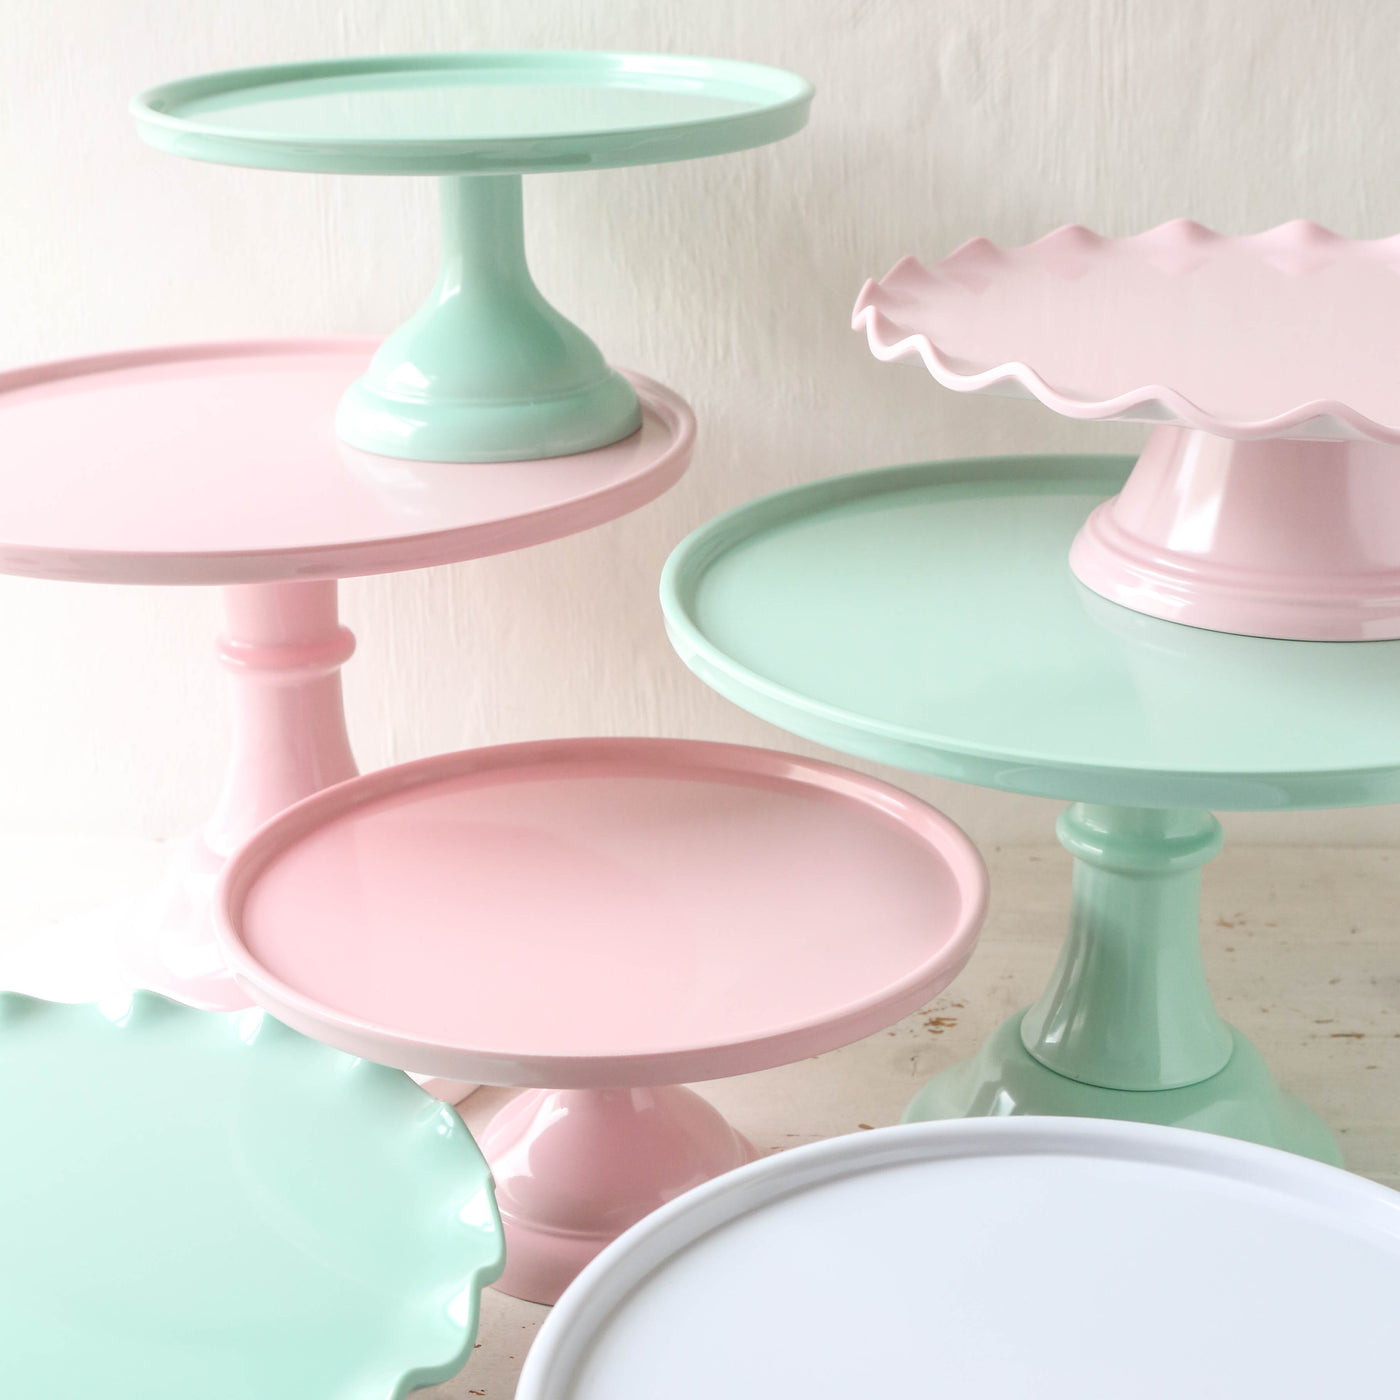 Small Mint Melamine Cake Stand